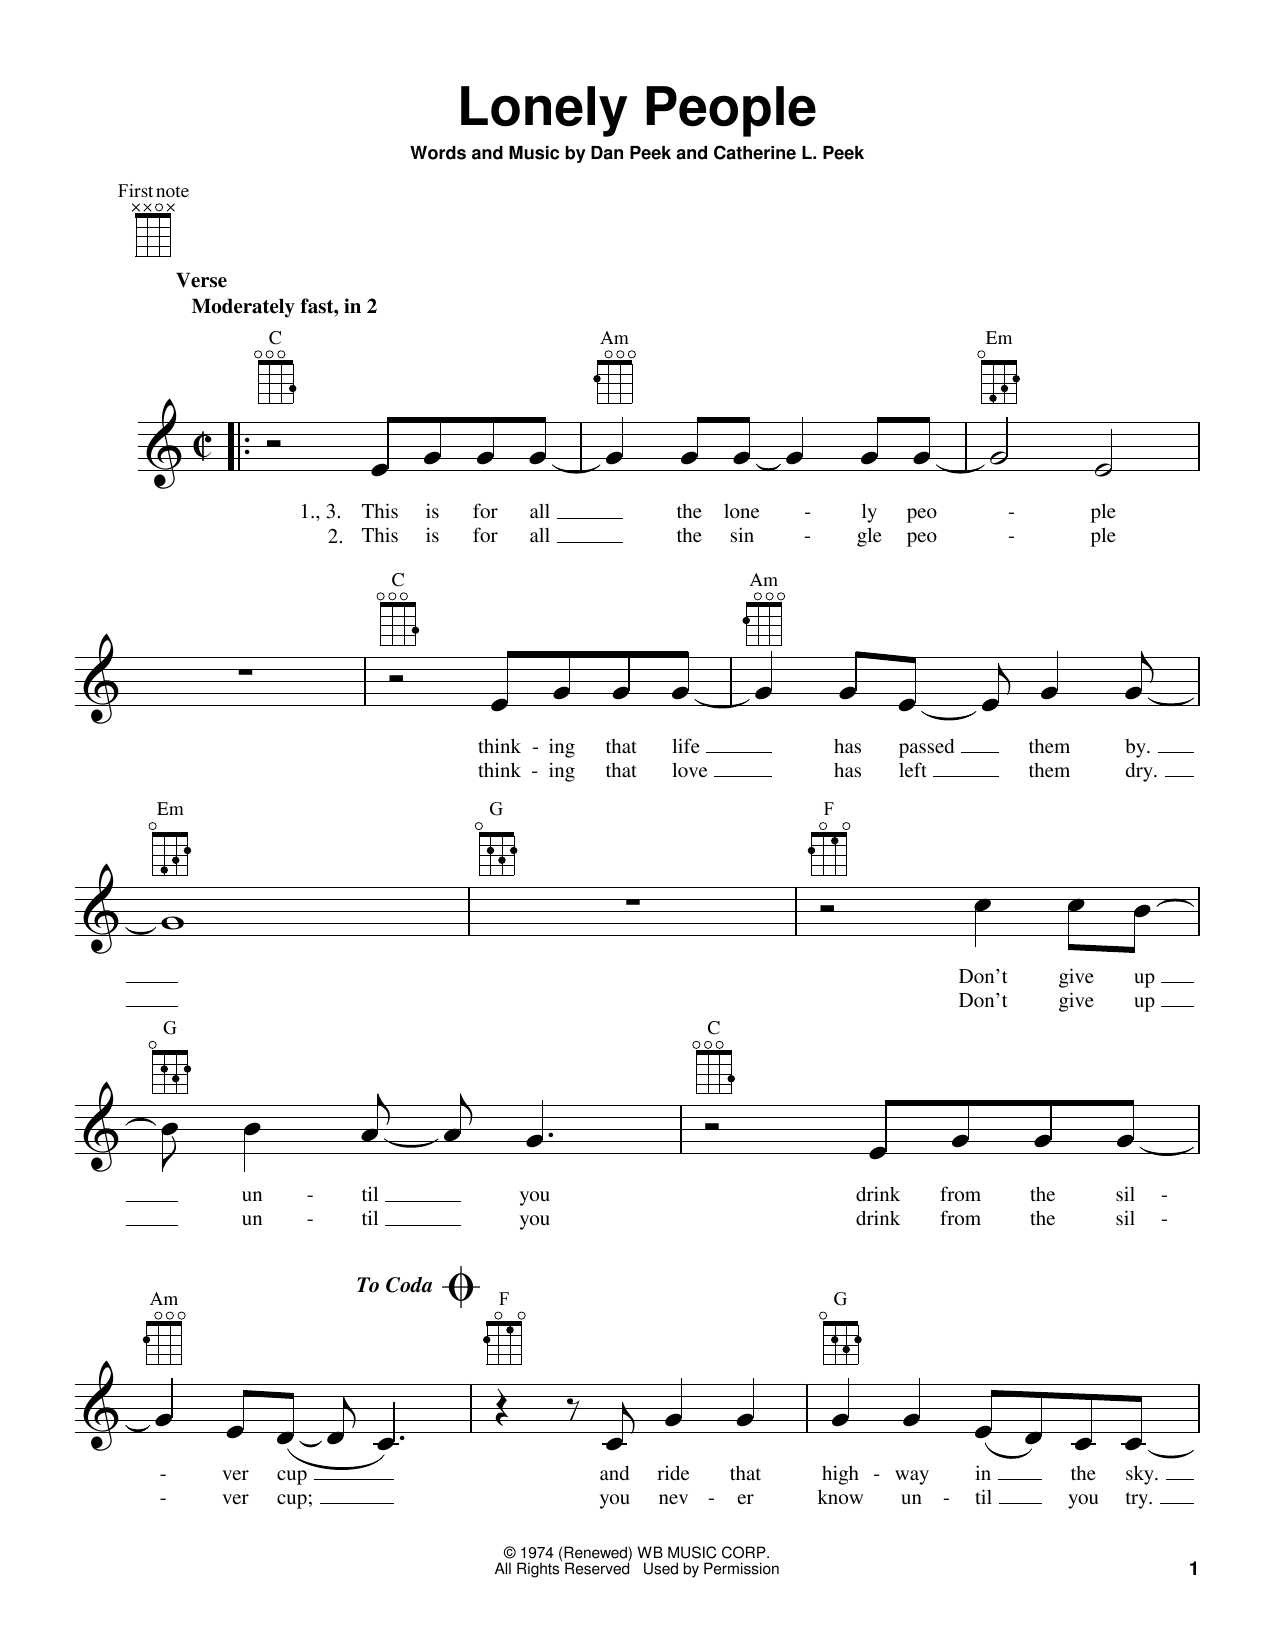 Download America Lonely People Sheet Music